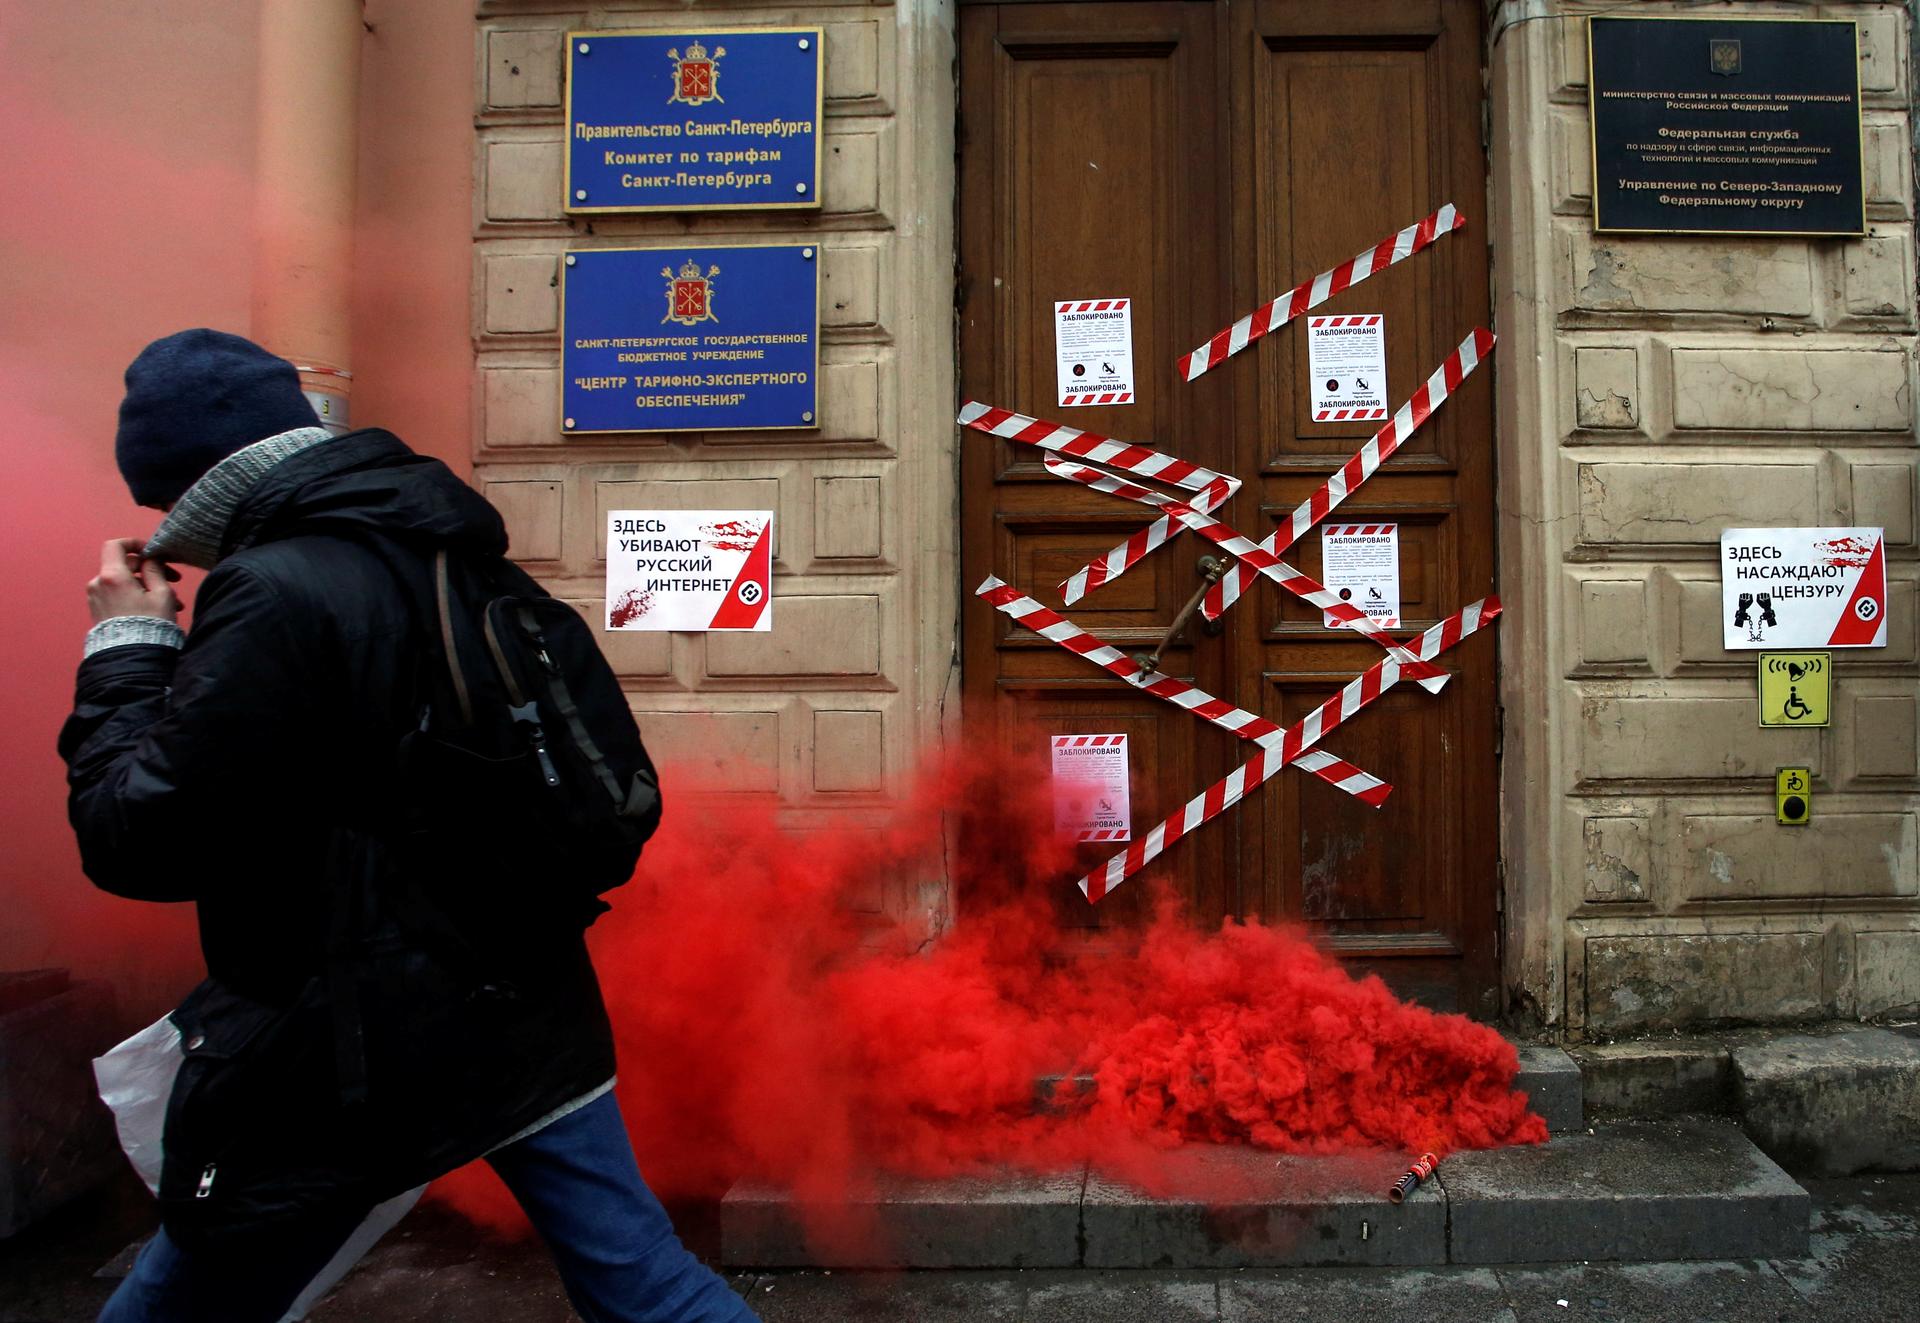 A protester walks away from a door with smoke in front of it. 